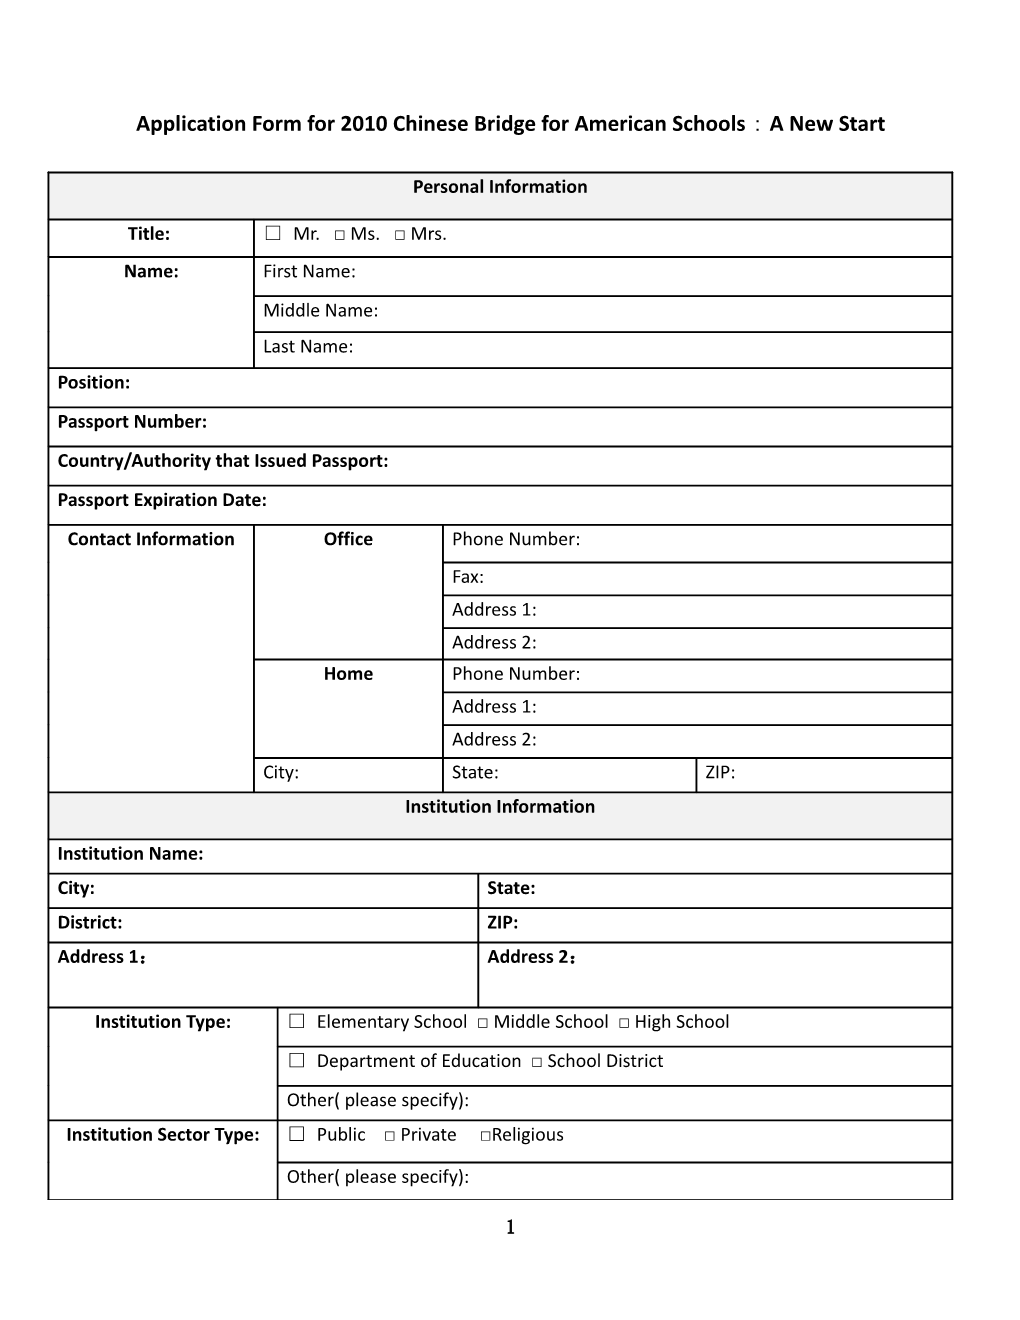 Application Form for 2010